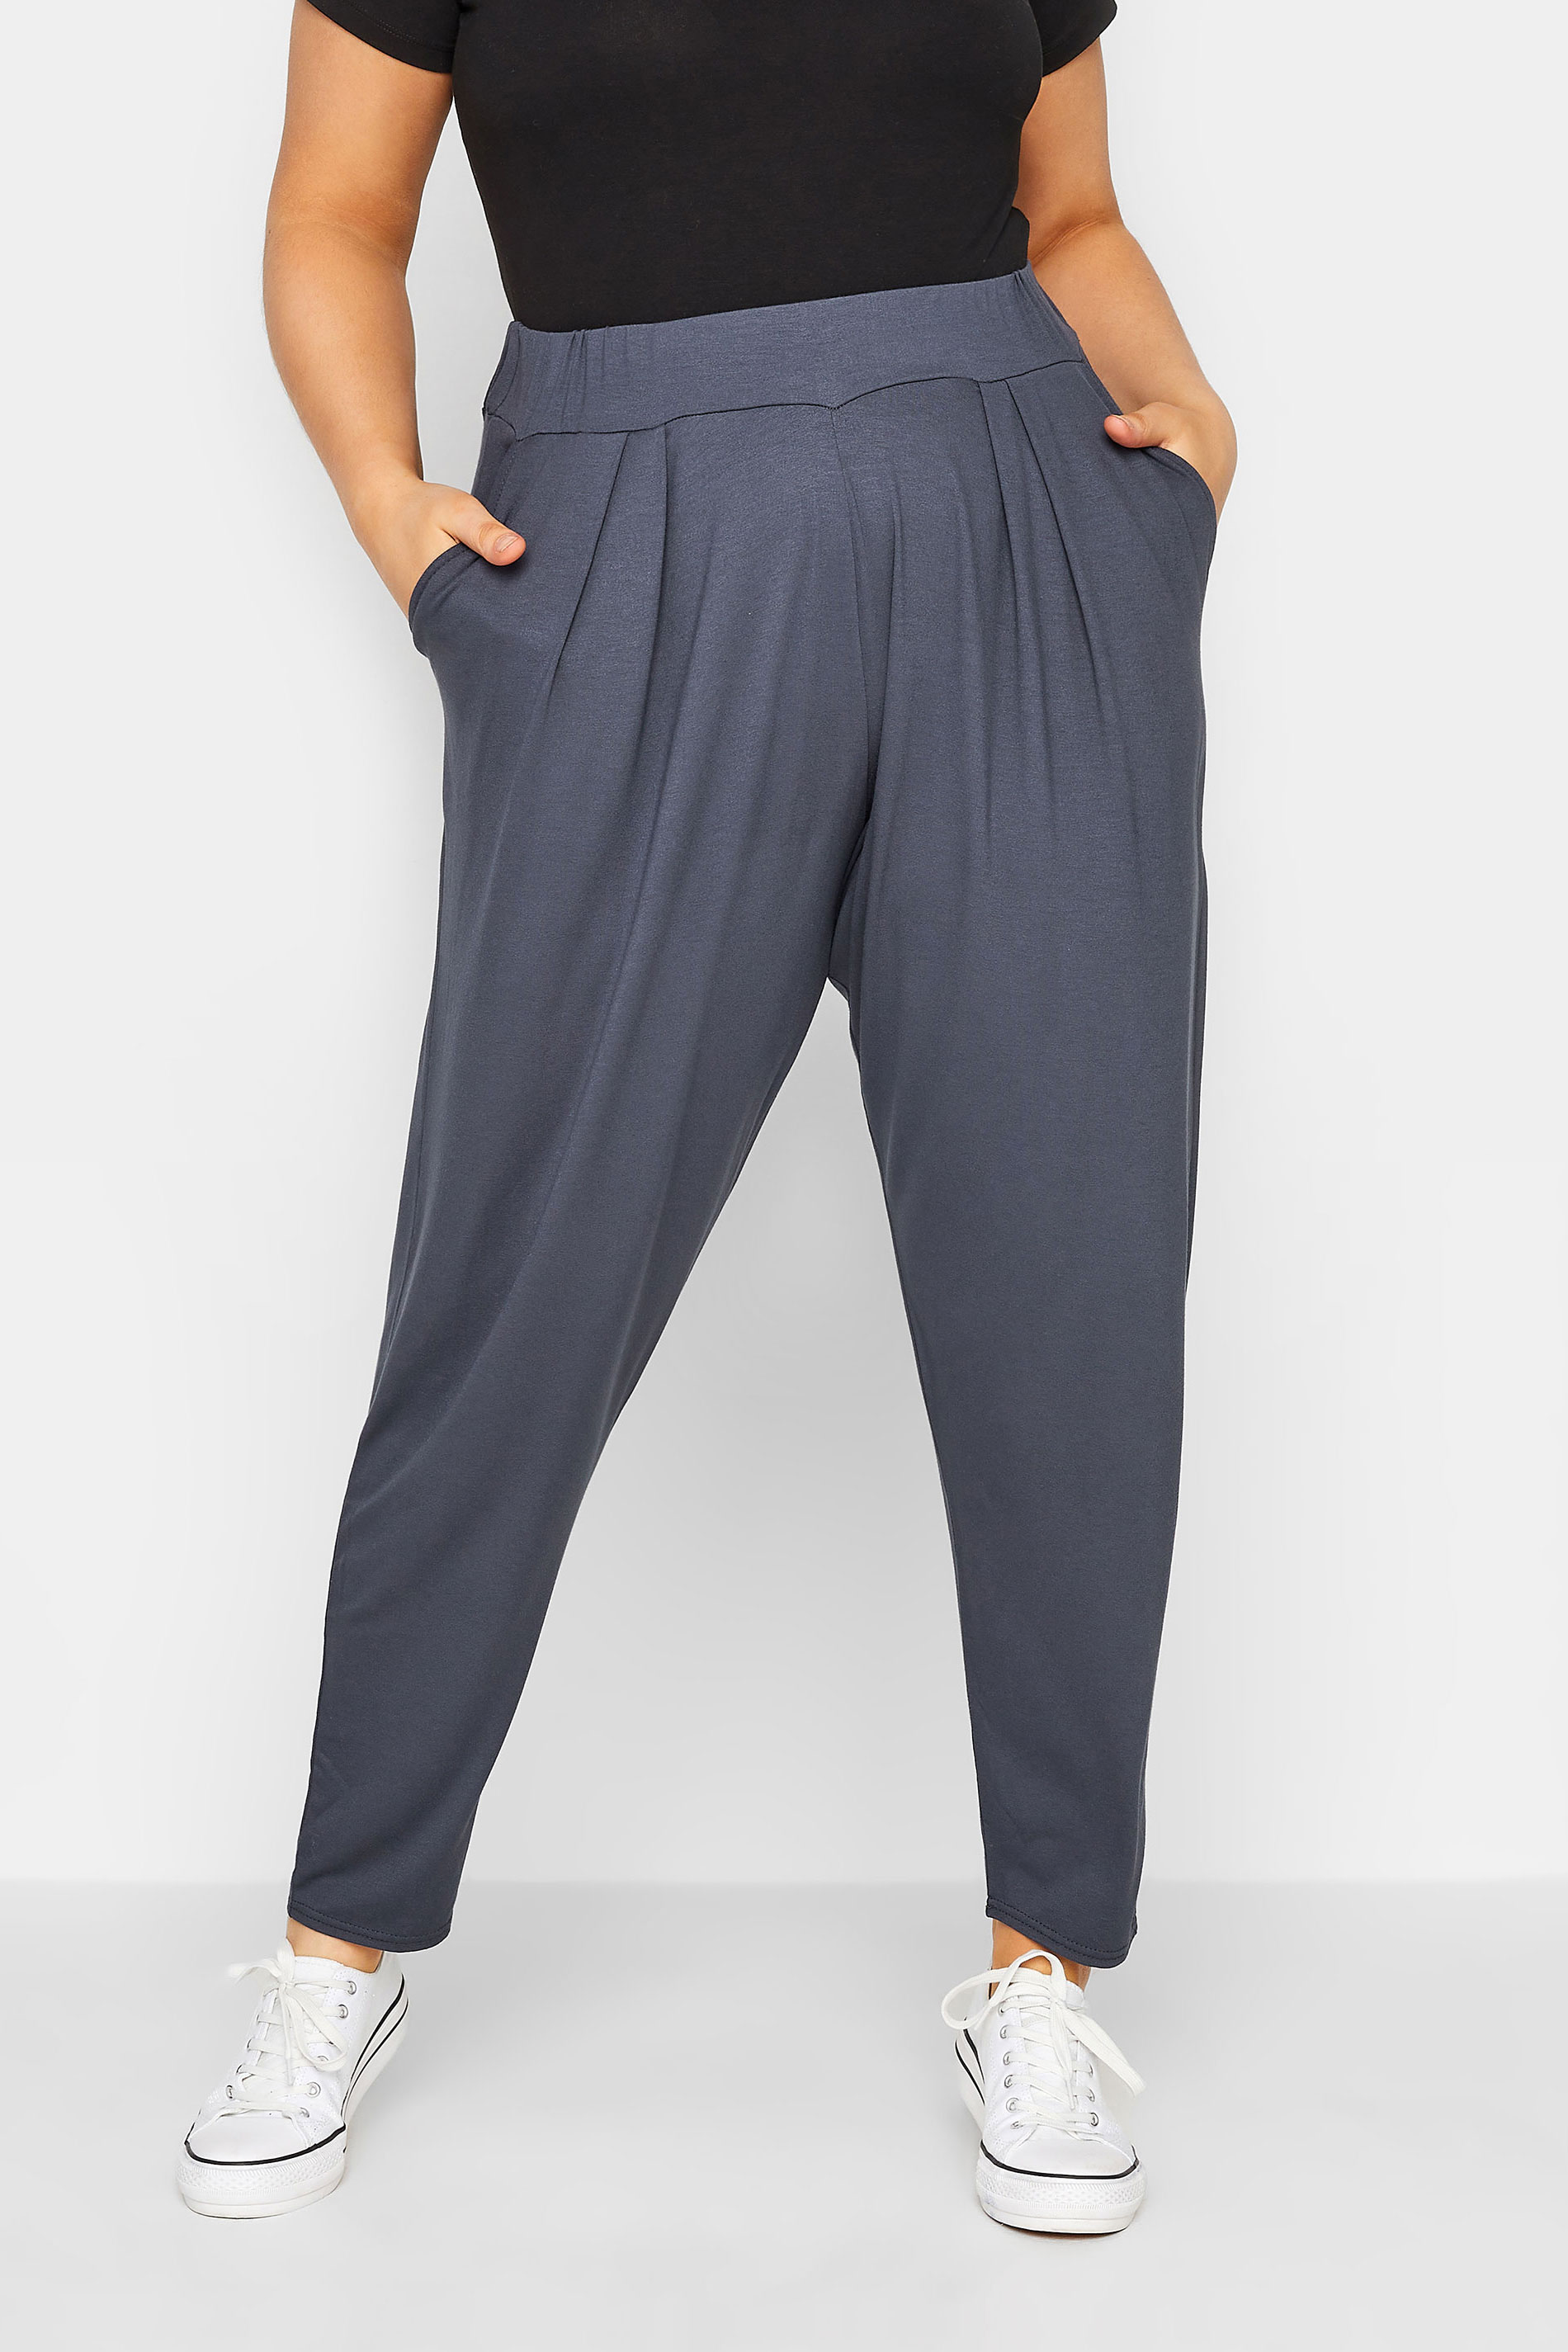 Elephant Orchard Tall Harem Pants in Navy - ShopperBoard